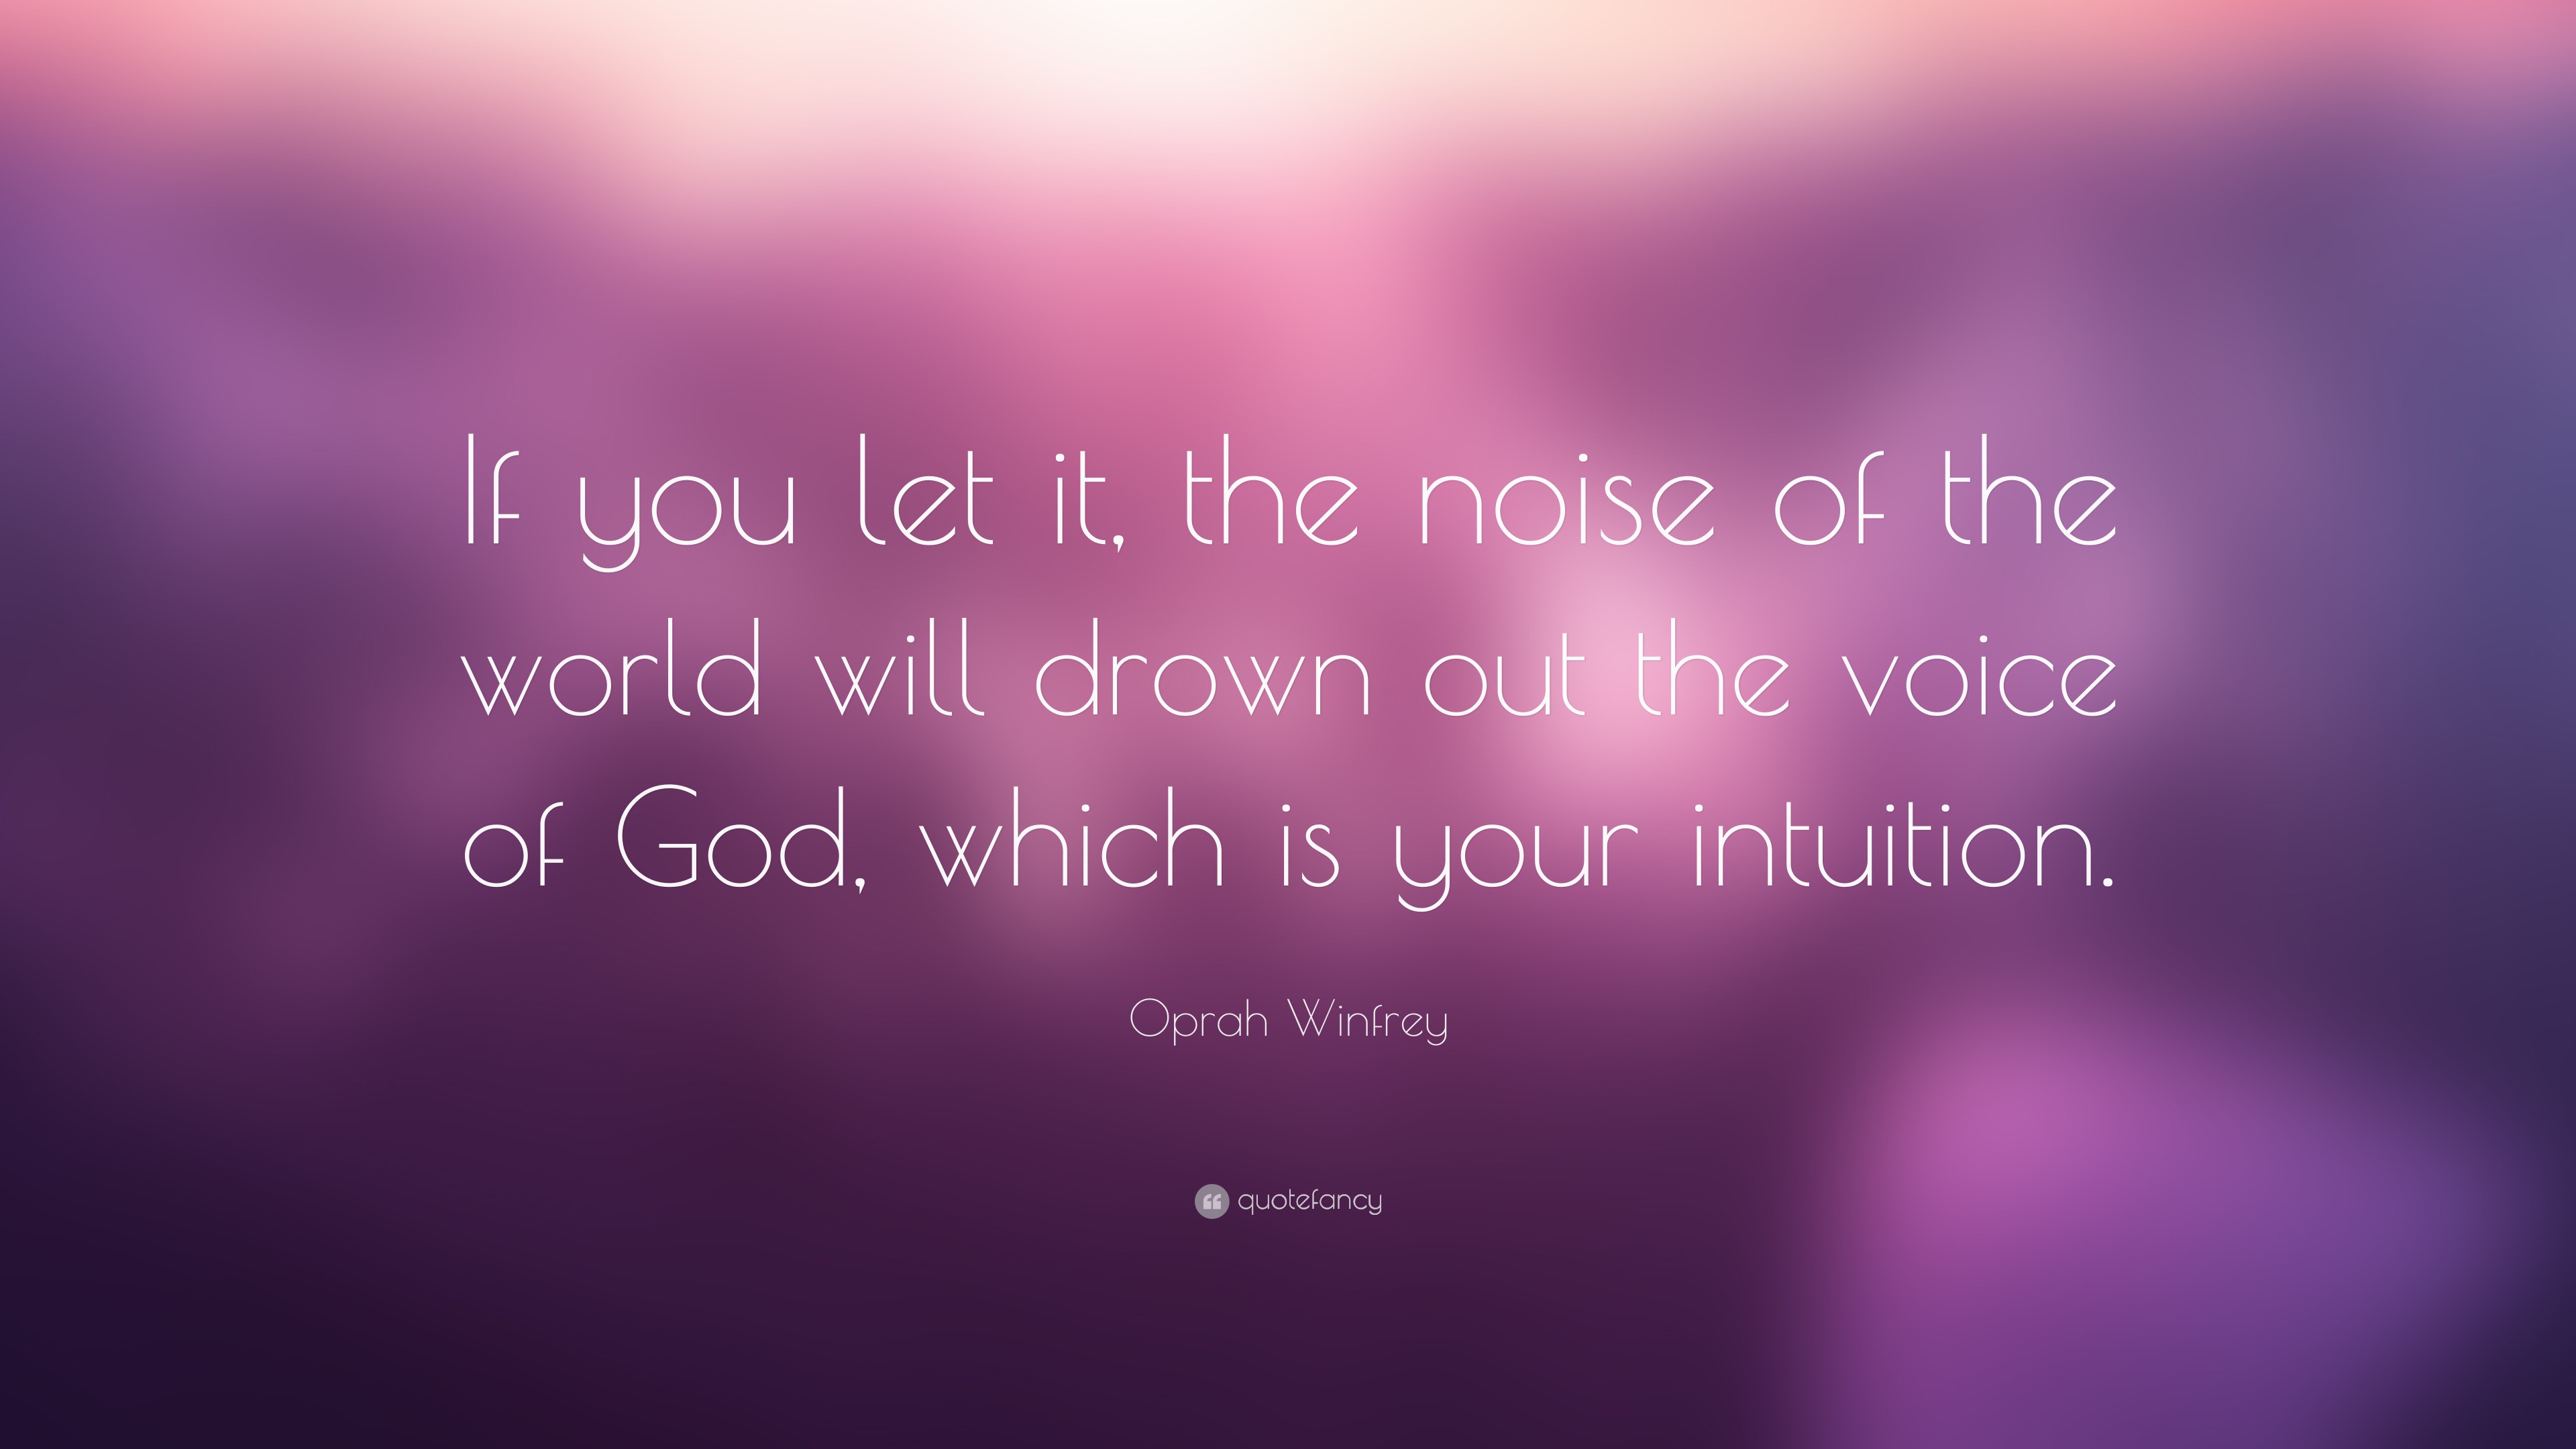 Oprah Winfrey Quote: “If you let it, the noise of the world will drown ...